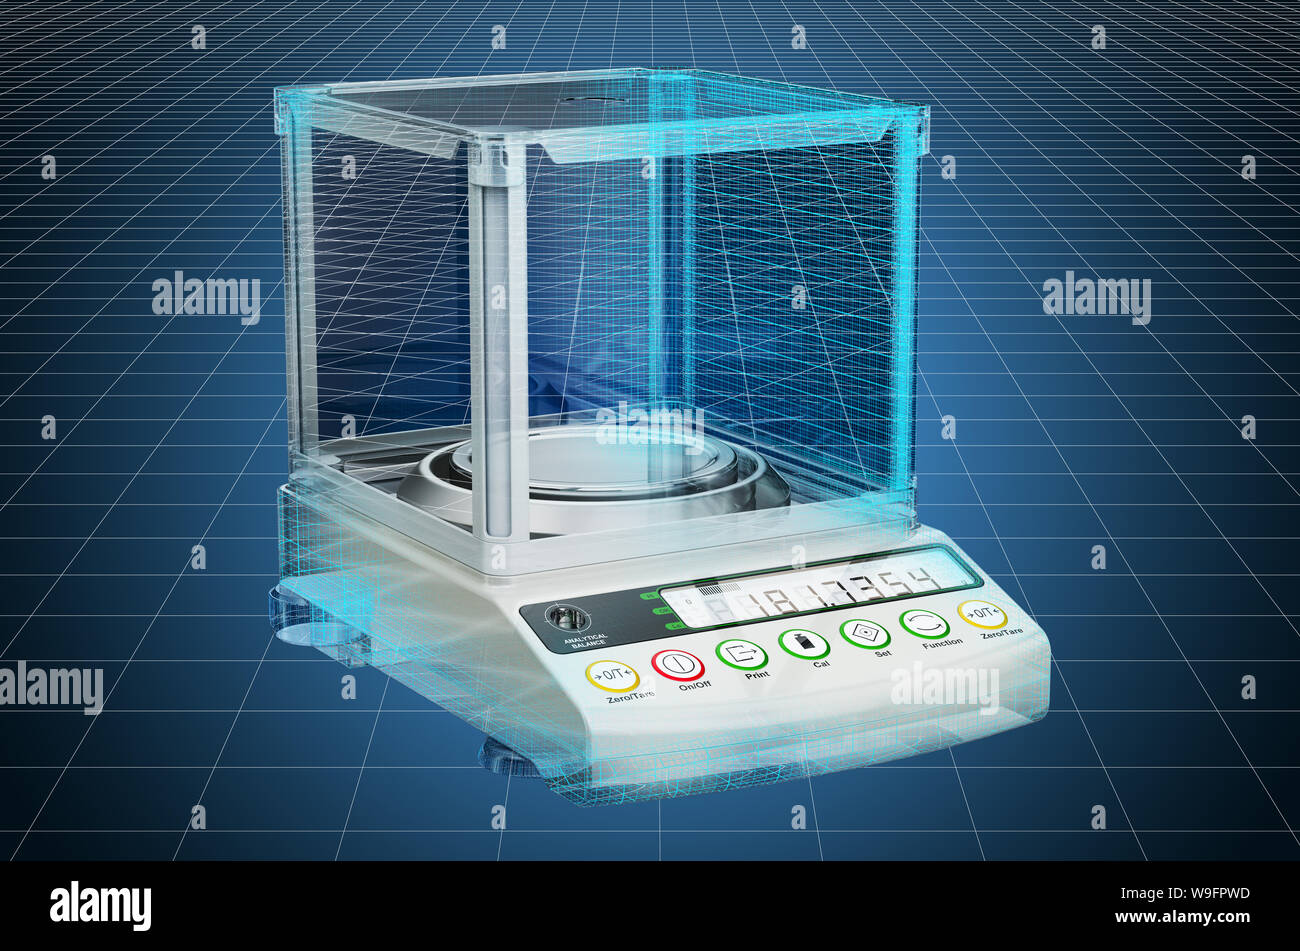 Visualization 3d cad model of Analytical Balance, Digital Lab Scale. 3D rendering Stock Photo